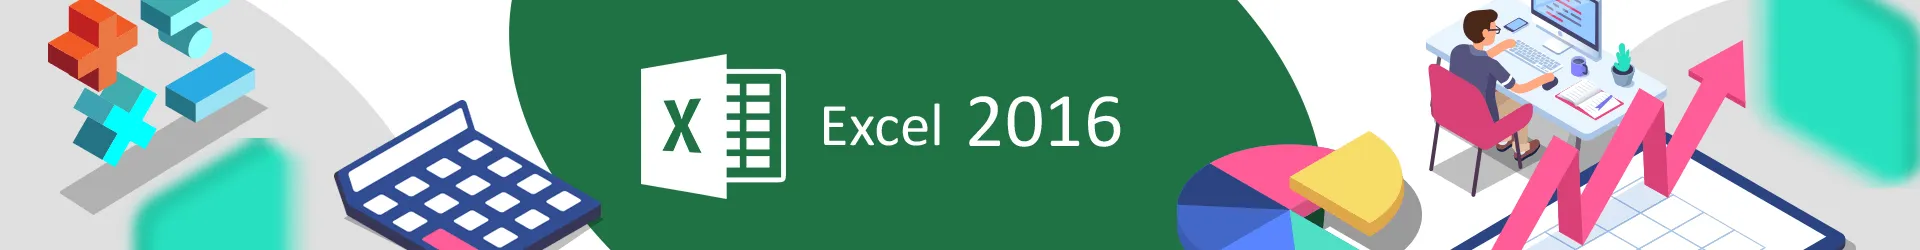 Formation Microsoft Office Excel 2016